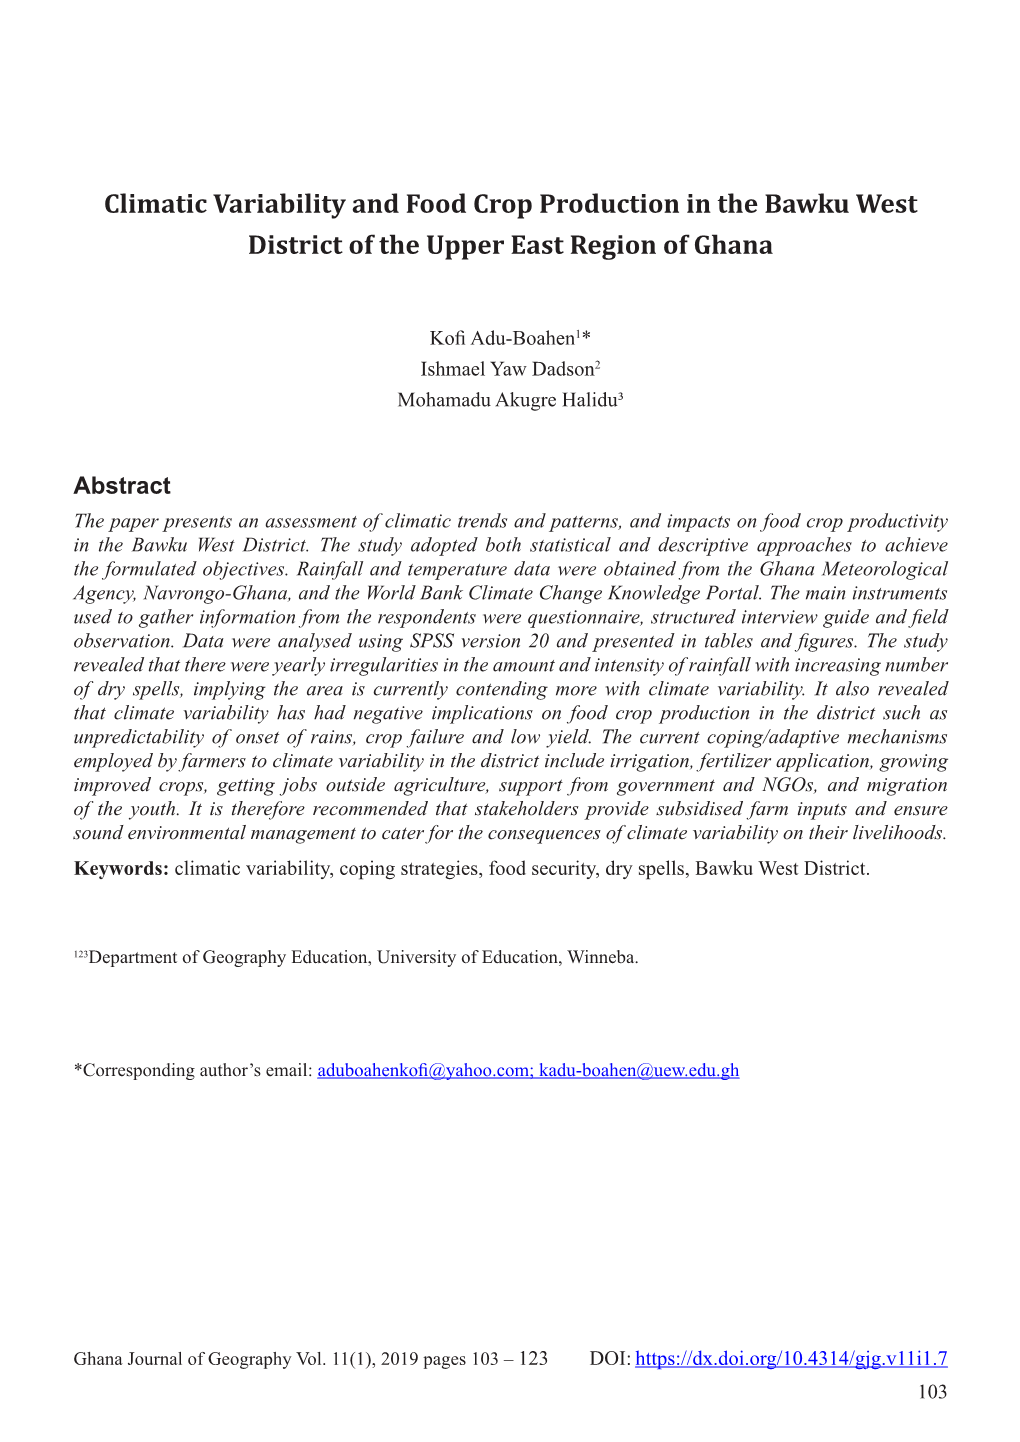 Climatic Variability and Food Crop Production in the Bawku West District of the Upper East Region of Ghana